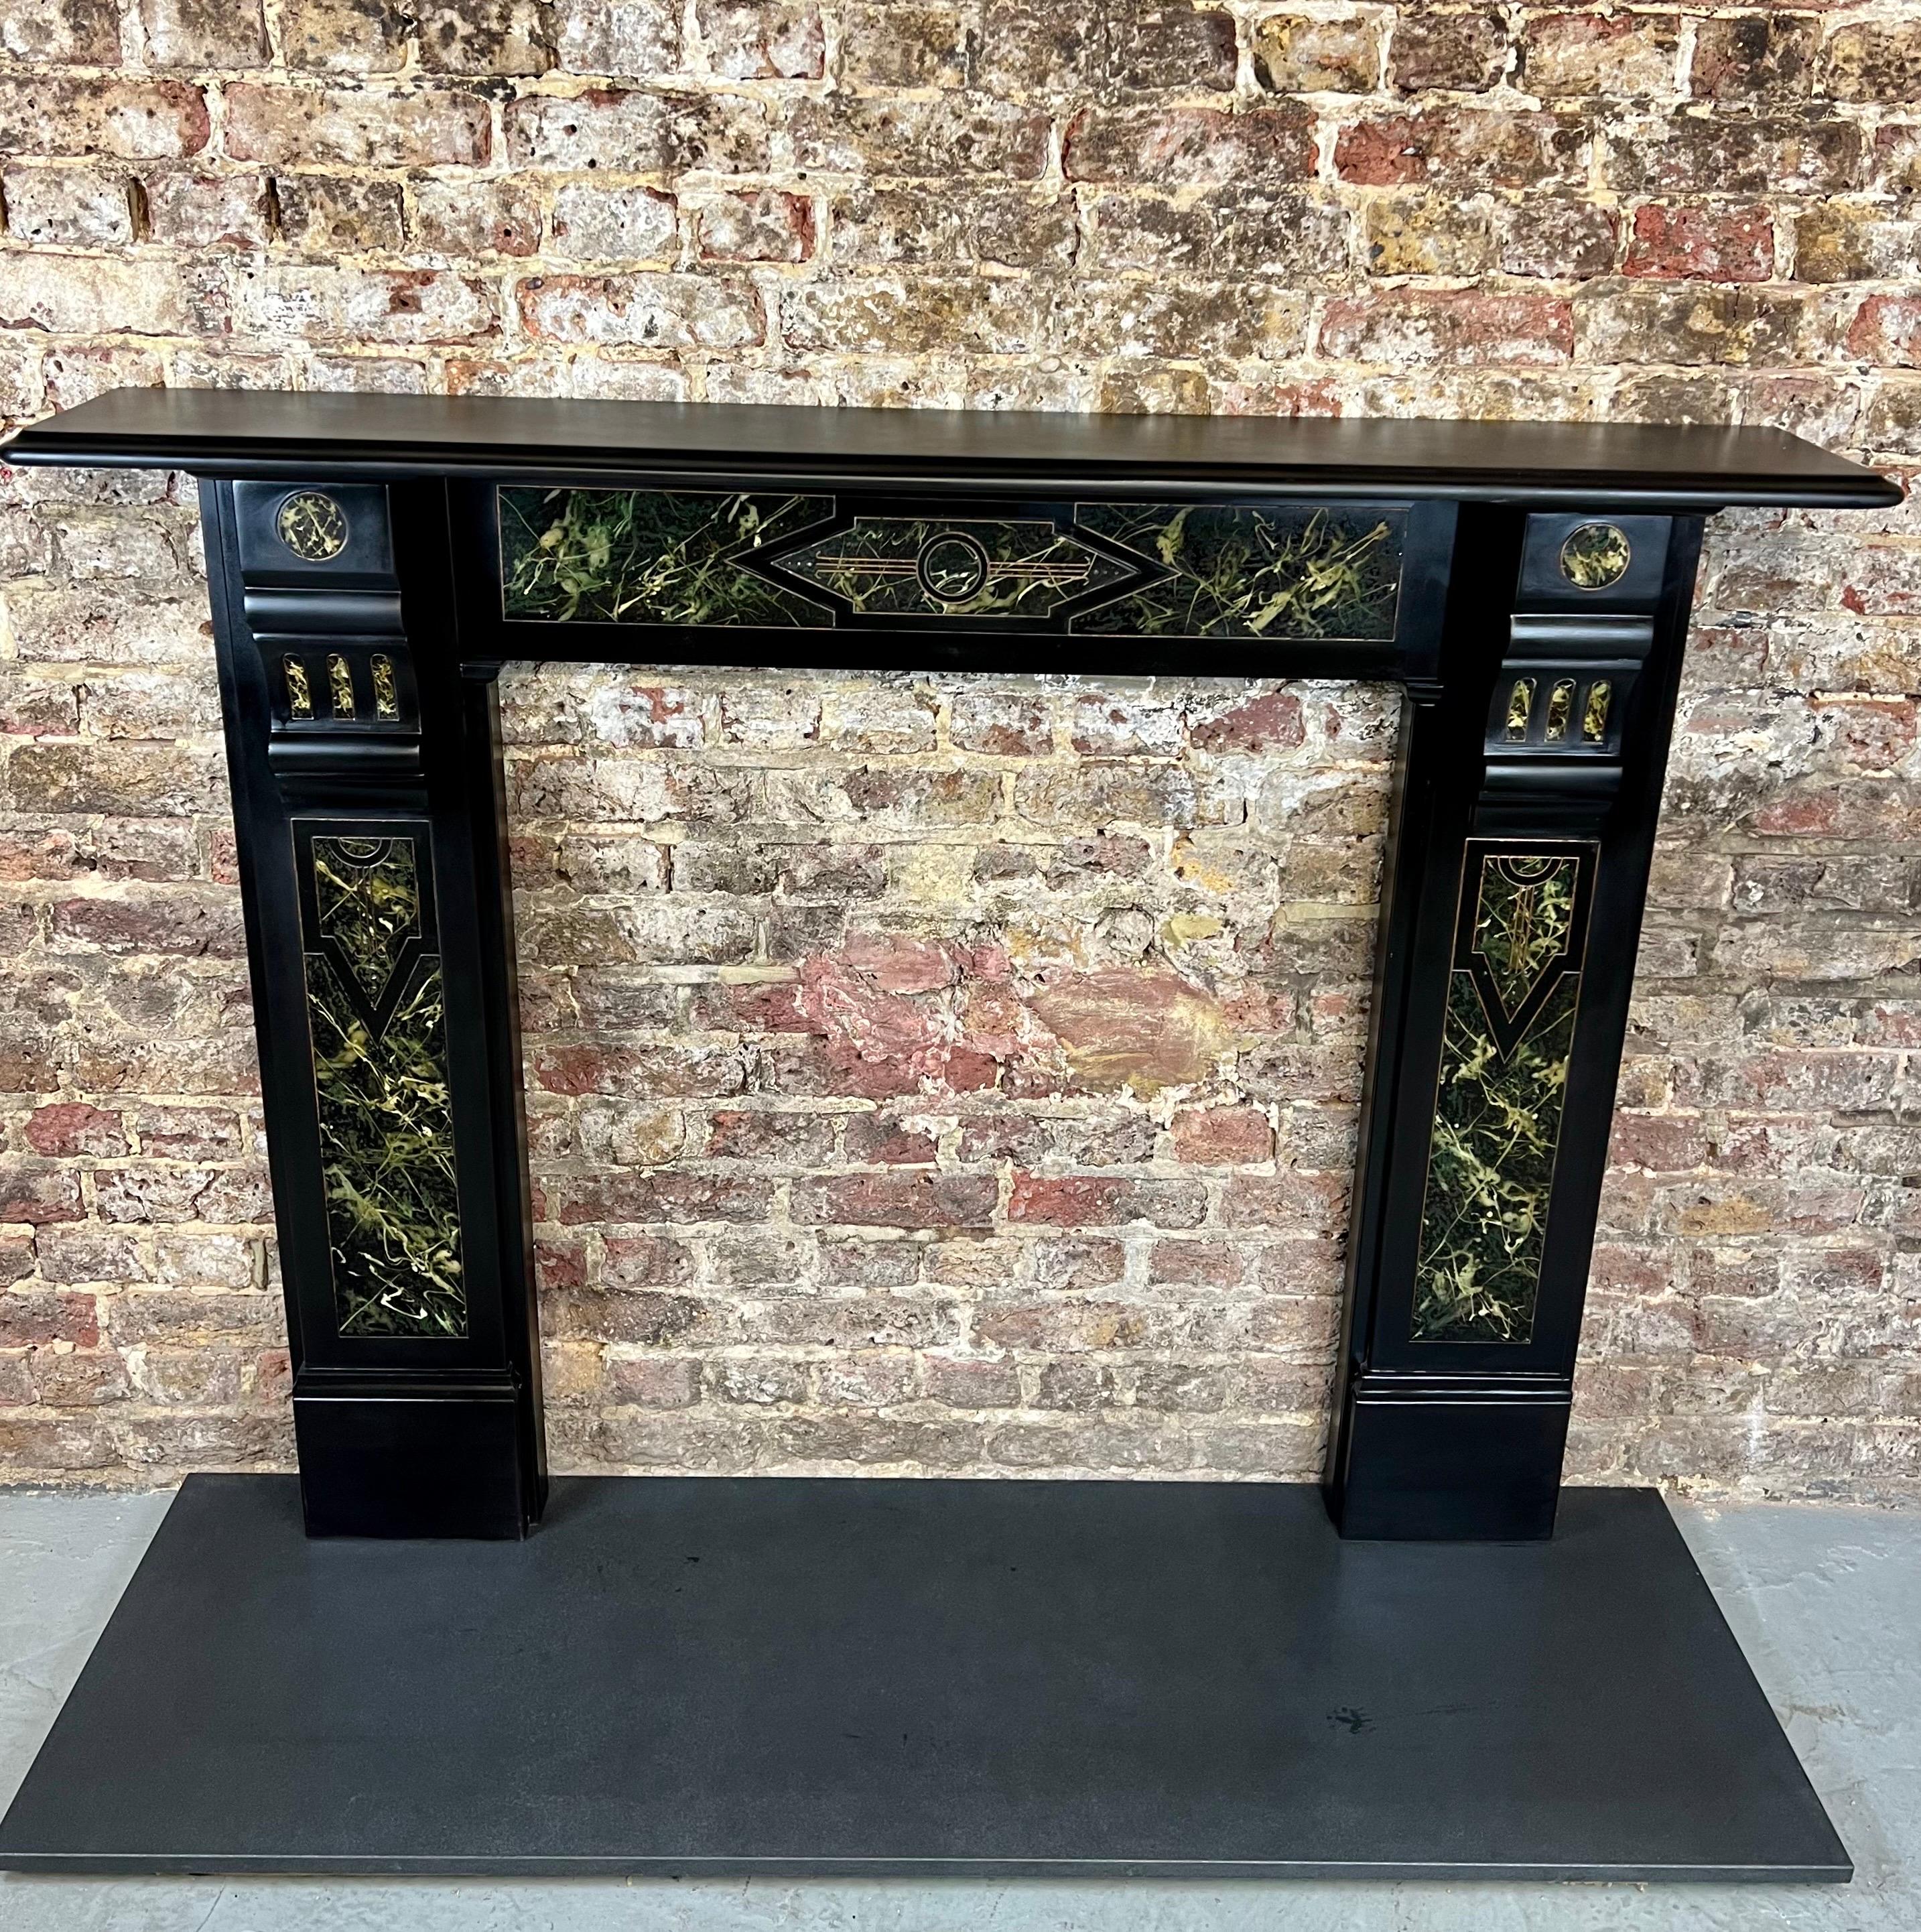 This 19th Century slate & marbleized fireplace mantlepiece is a true example of English Victoriana, demonstrating the new techniques used for the fashion of the period. This antique fireplace surround is made from fine Welsh slate, blackened finish